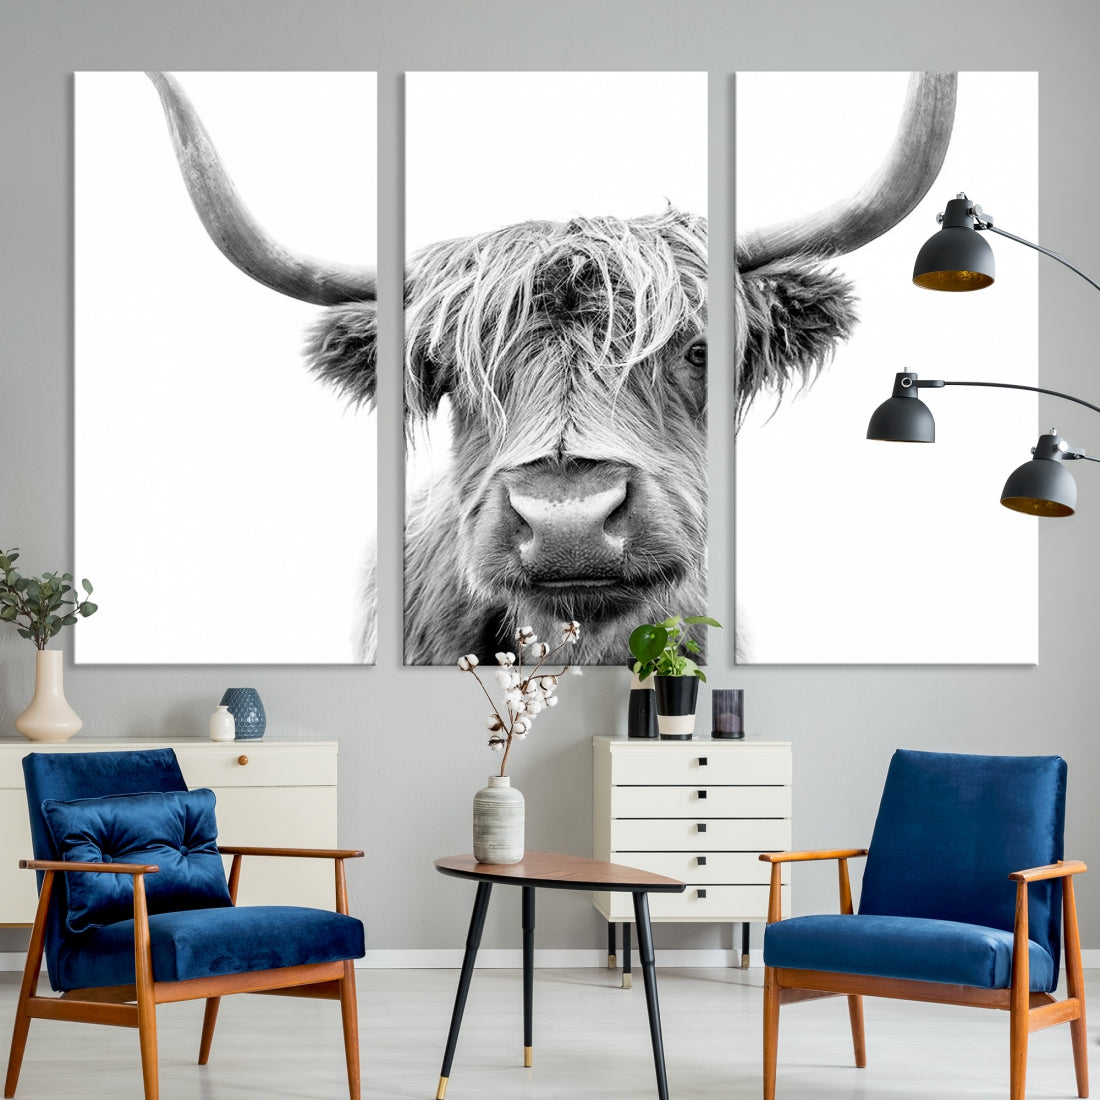 Scottish Highland Cow to Your Farmhouse with Our Wall Art Canvas Print Rustic Decor